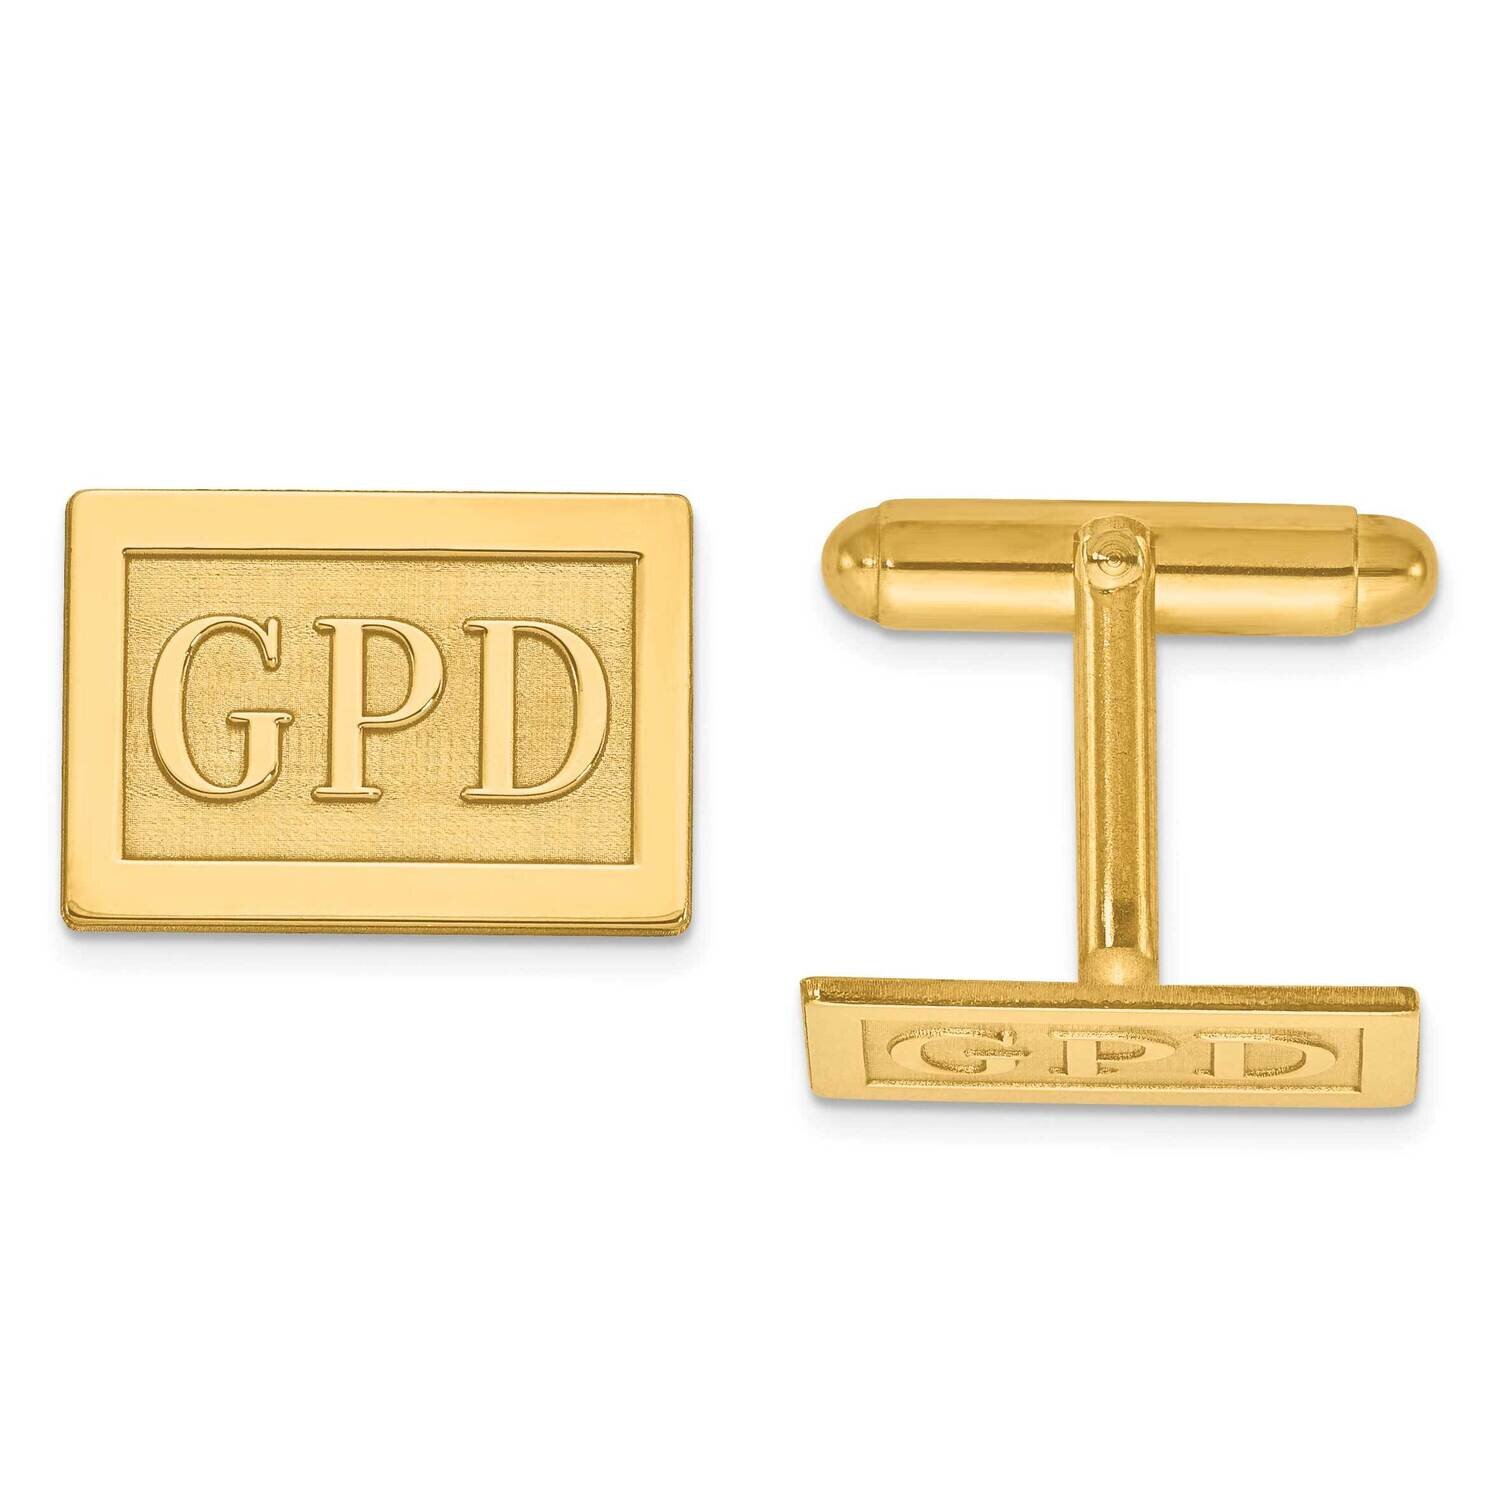 Raised Letters Rectangle Monogram Cuff Links 14k Gold XNA614Y